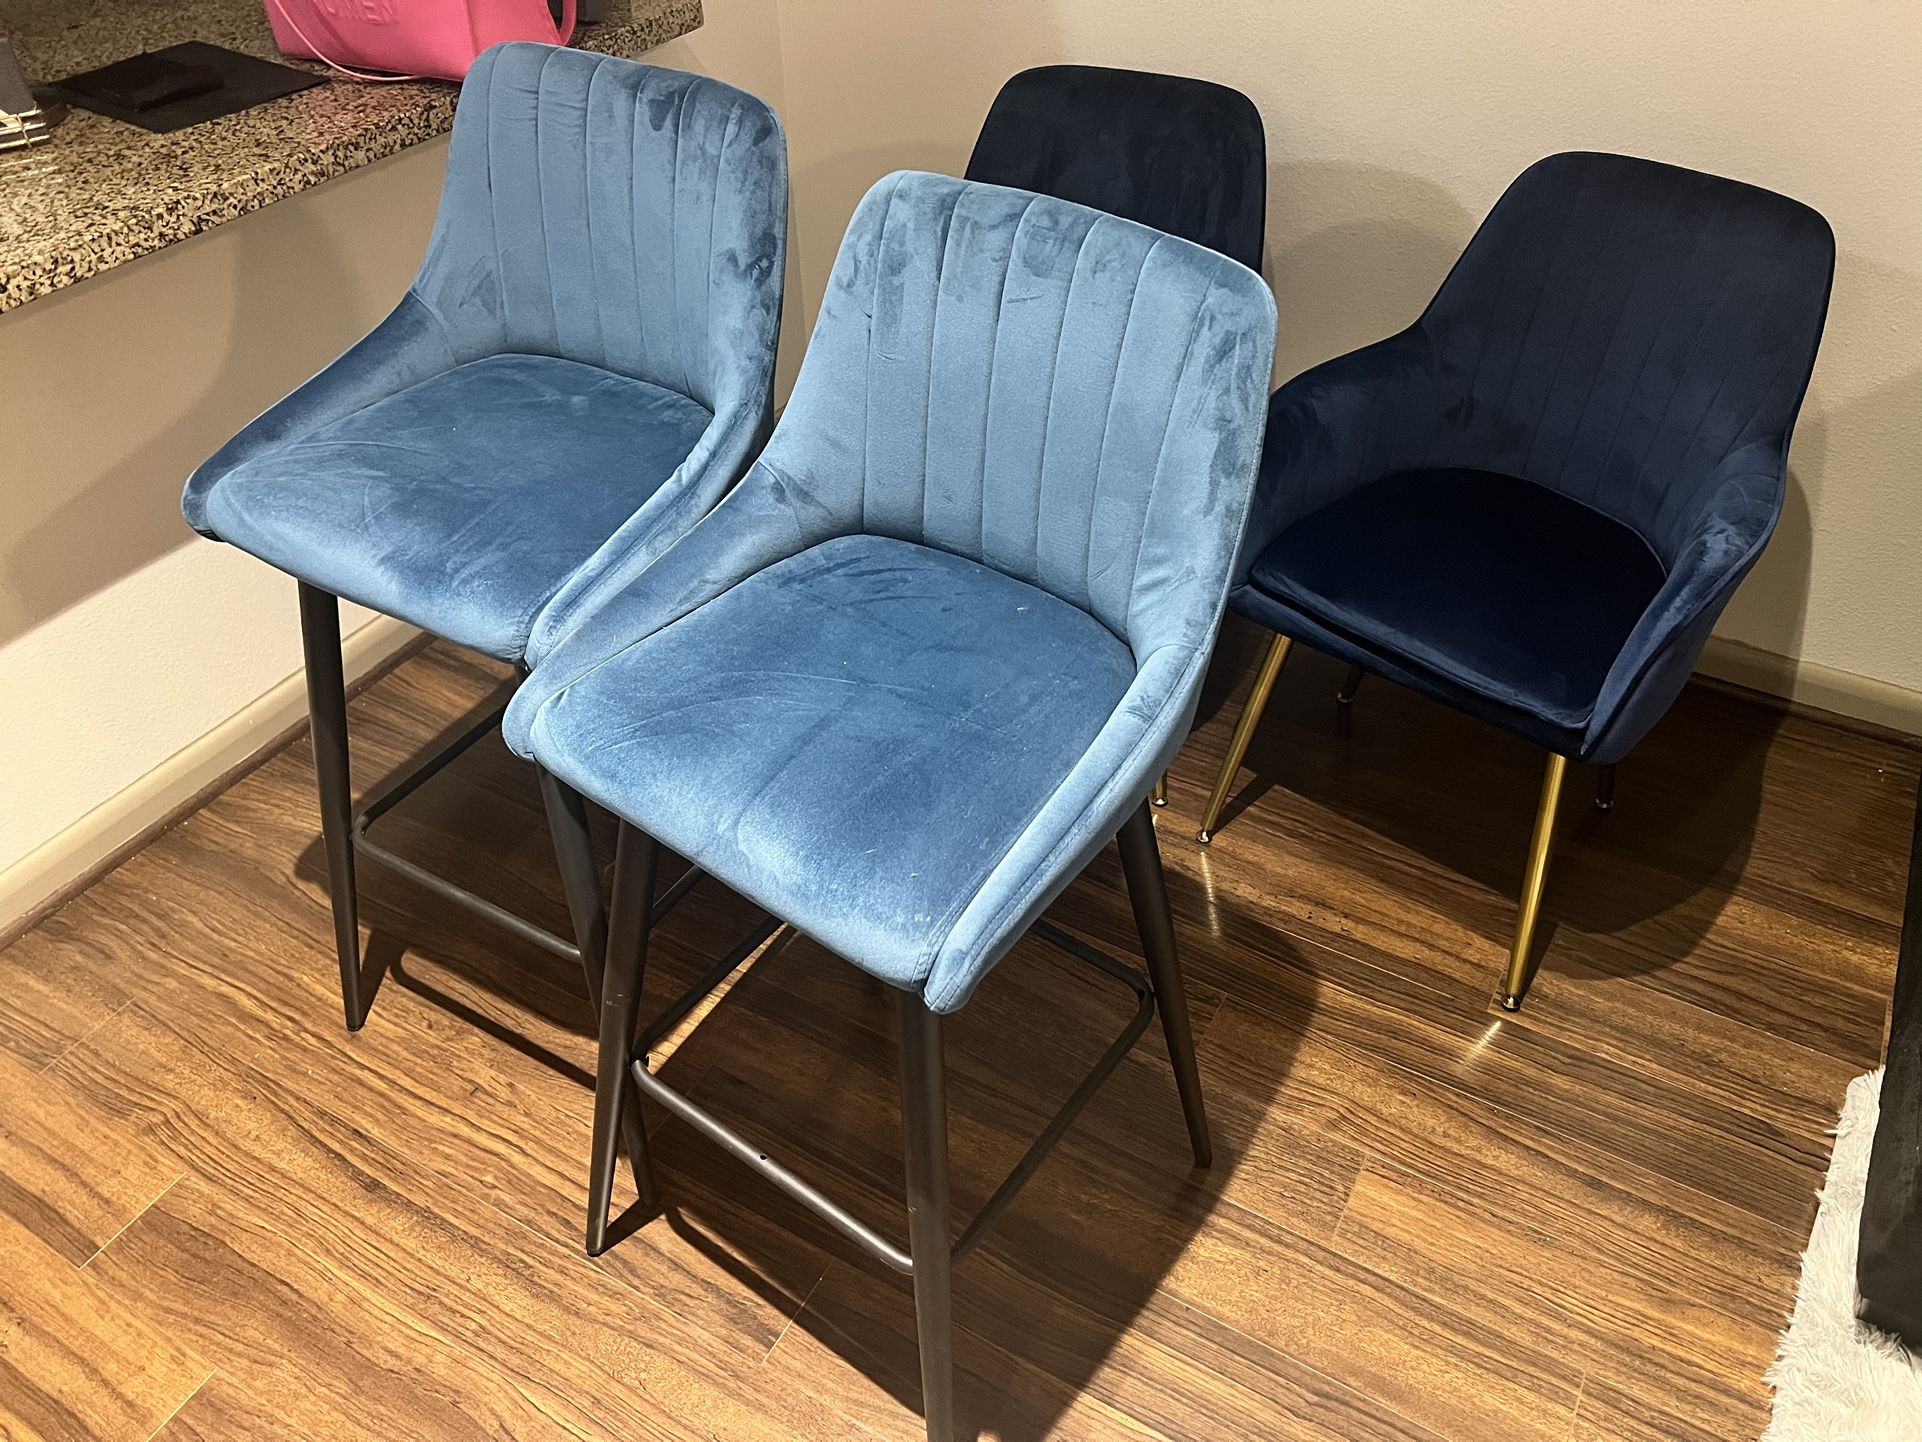 Blue Suede Chairs